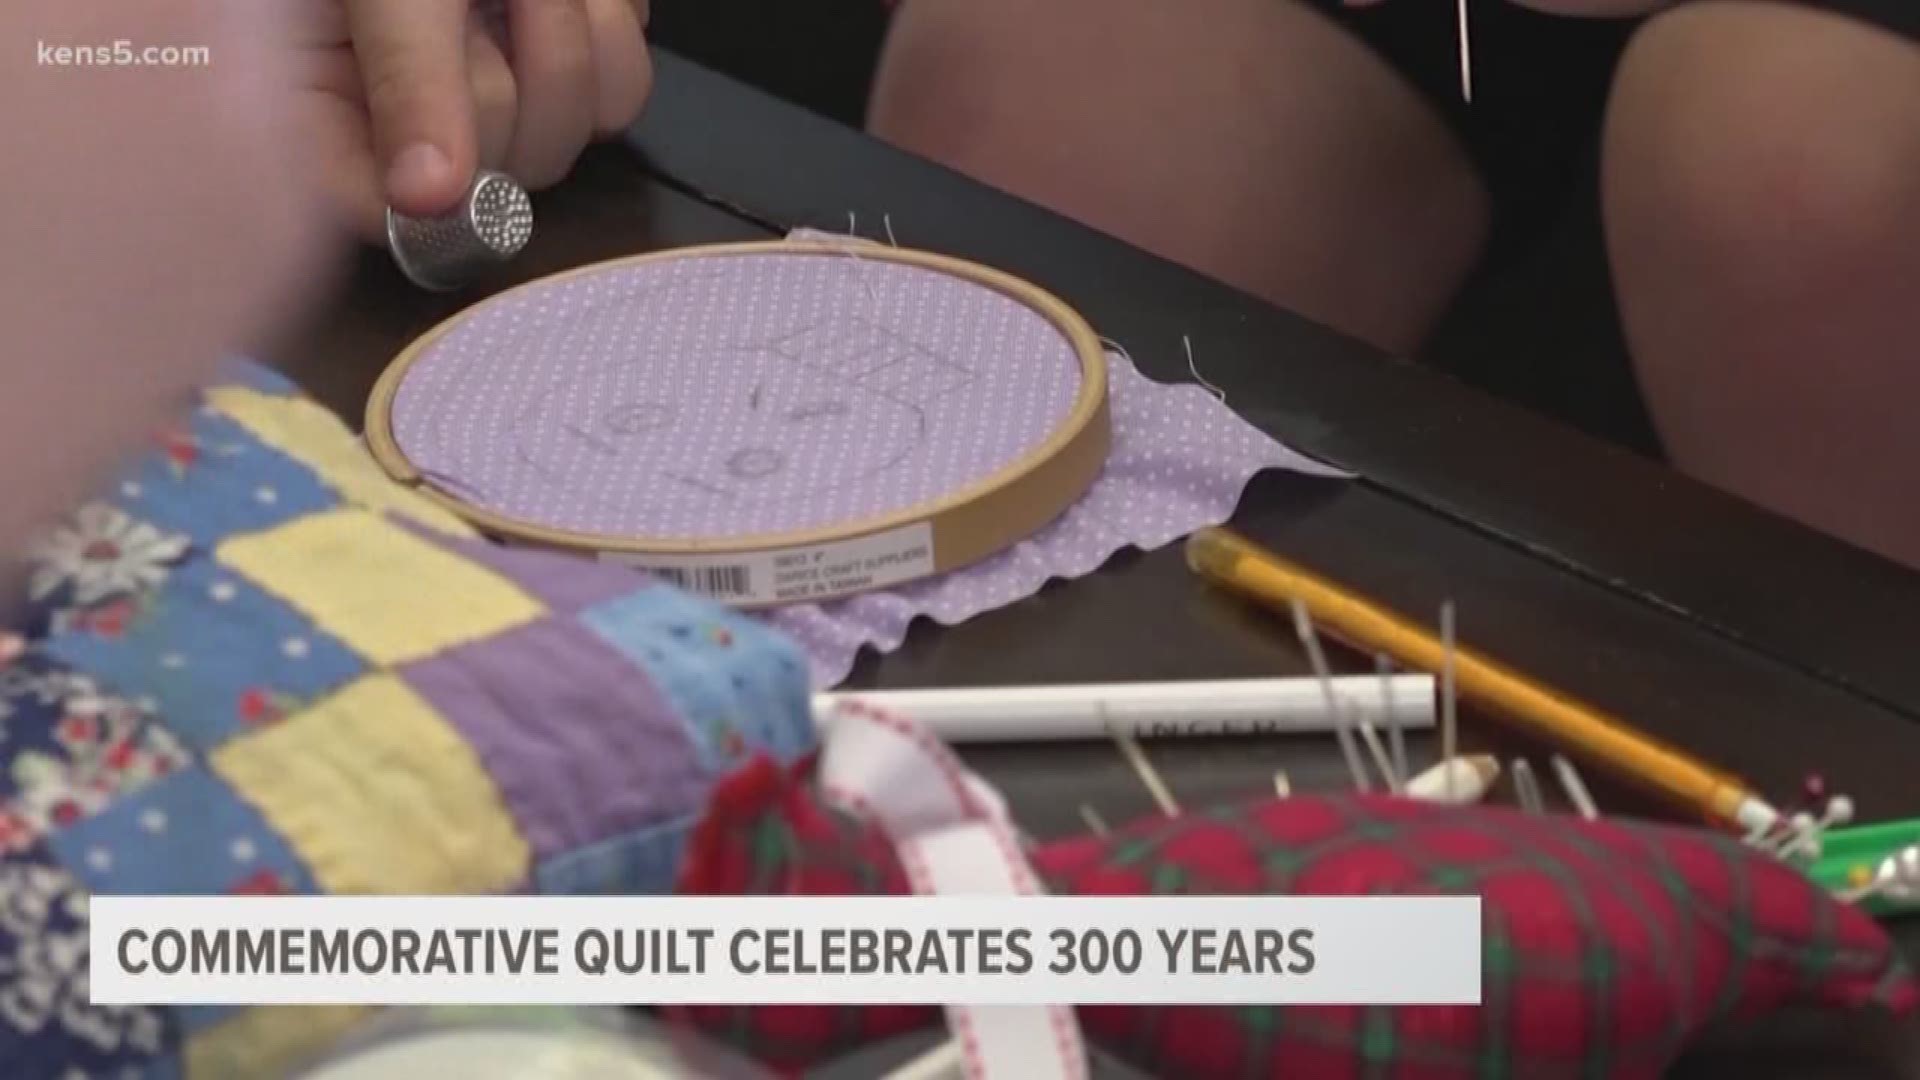 A sewing studio is creating a special quilt for the Tricentennial year celebrations. The public is invited to be part of the project and it will eventually be displayed in libraries.